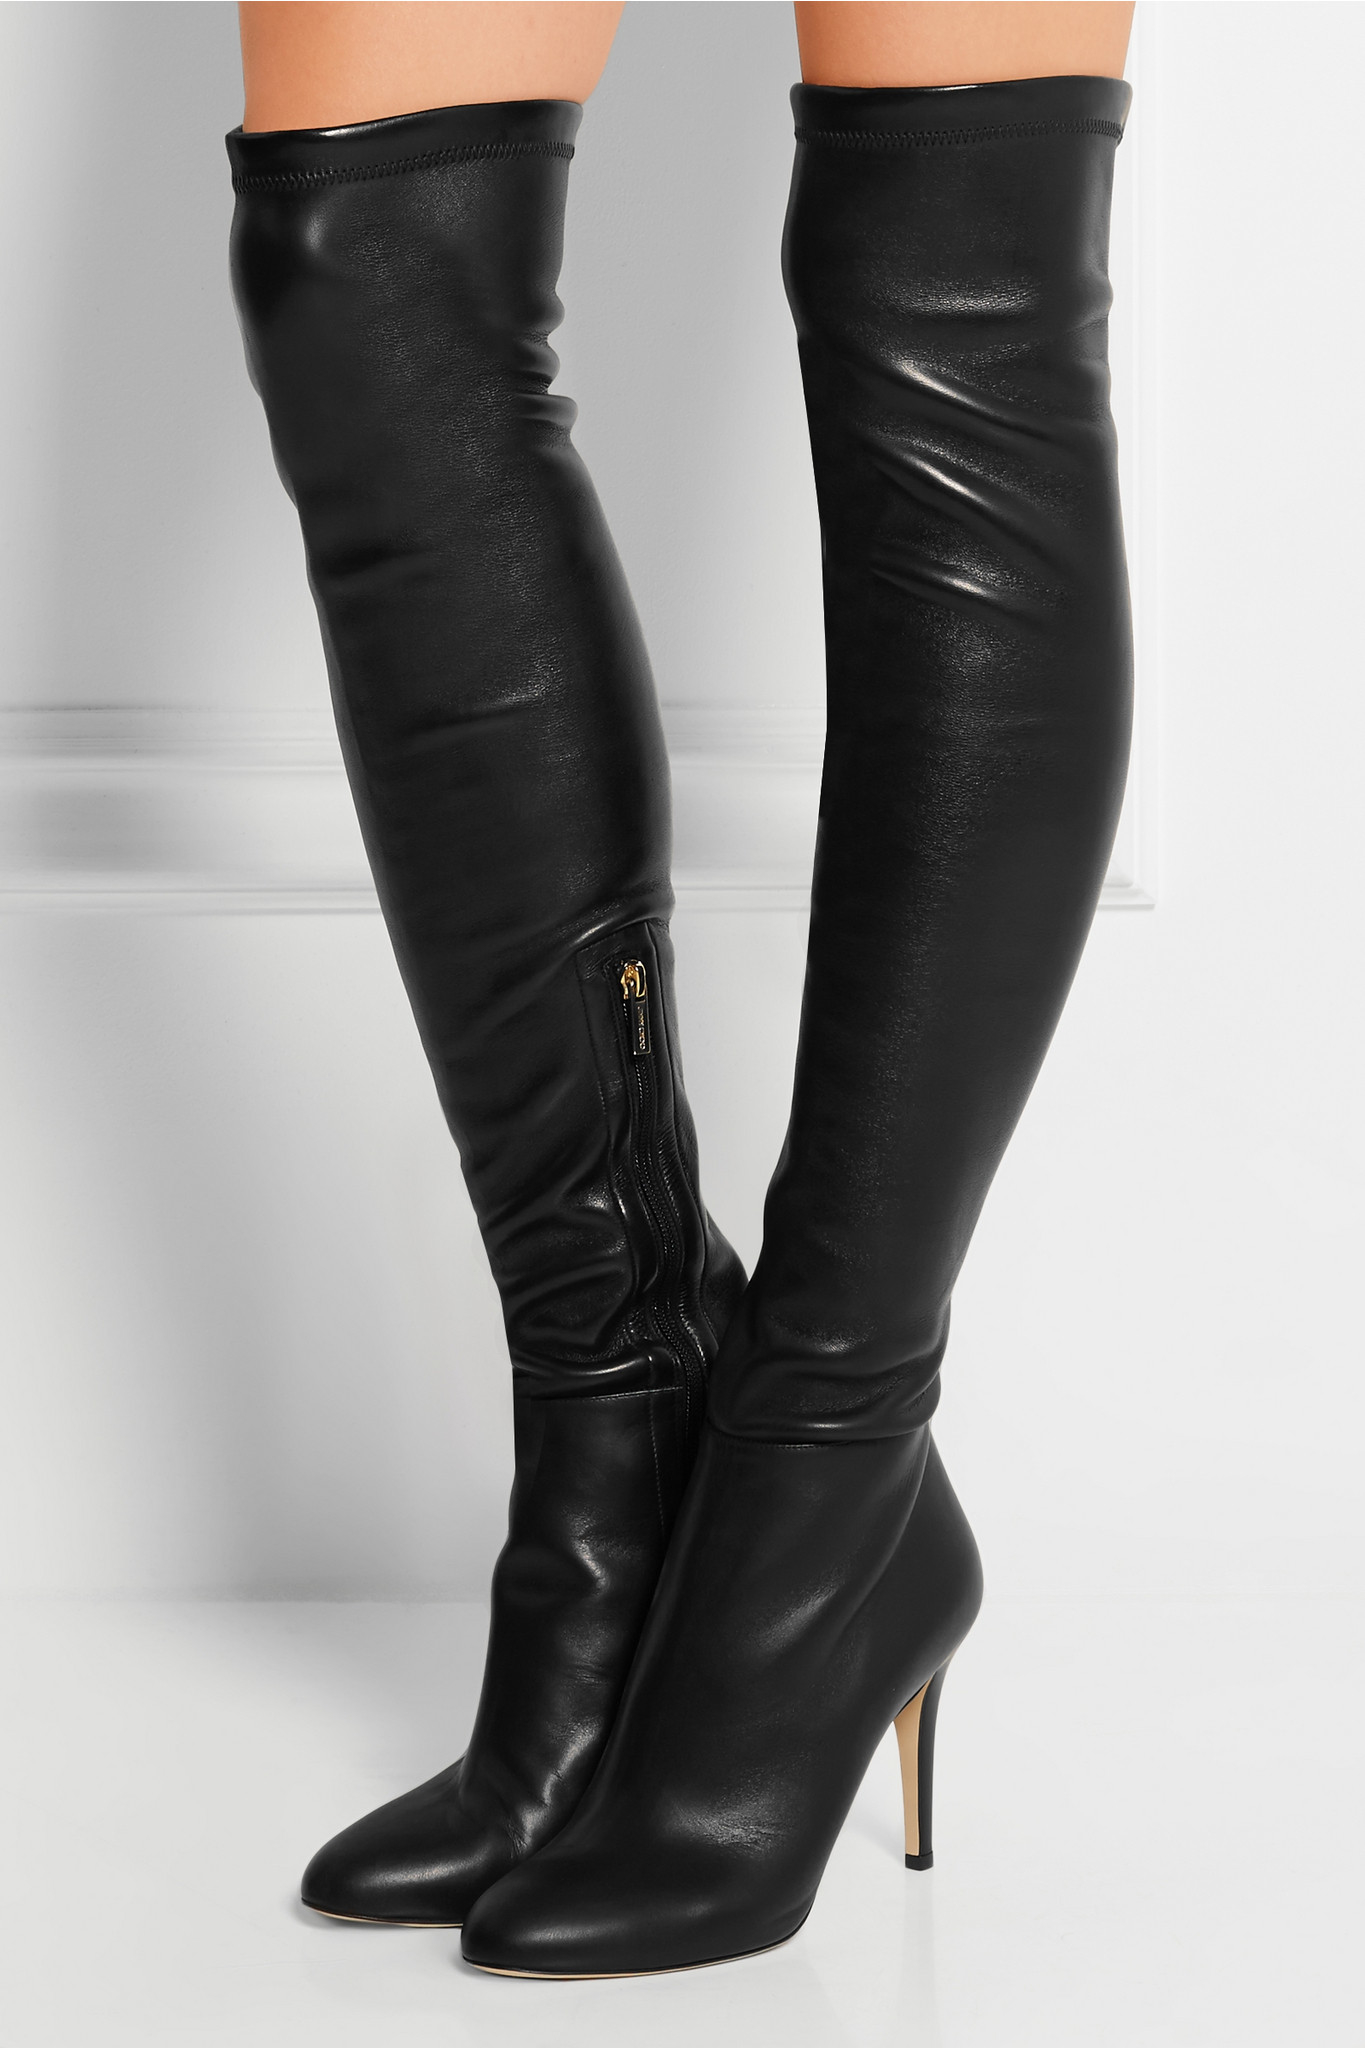 Jimmy Choo Toni Stretchleather Overtheknee Boots in Black Lyst